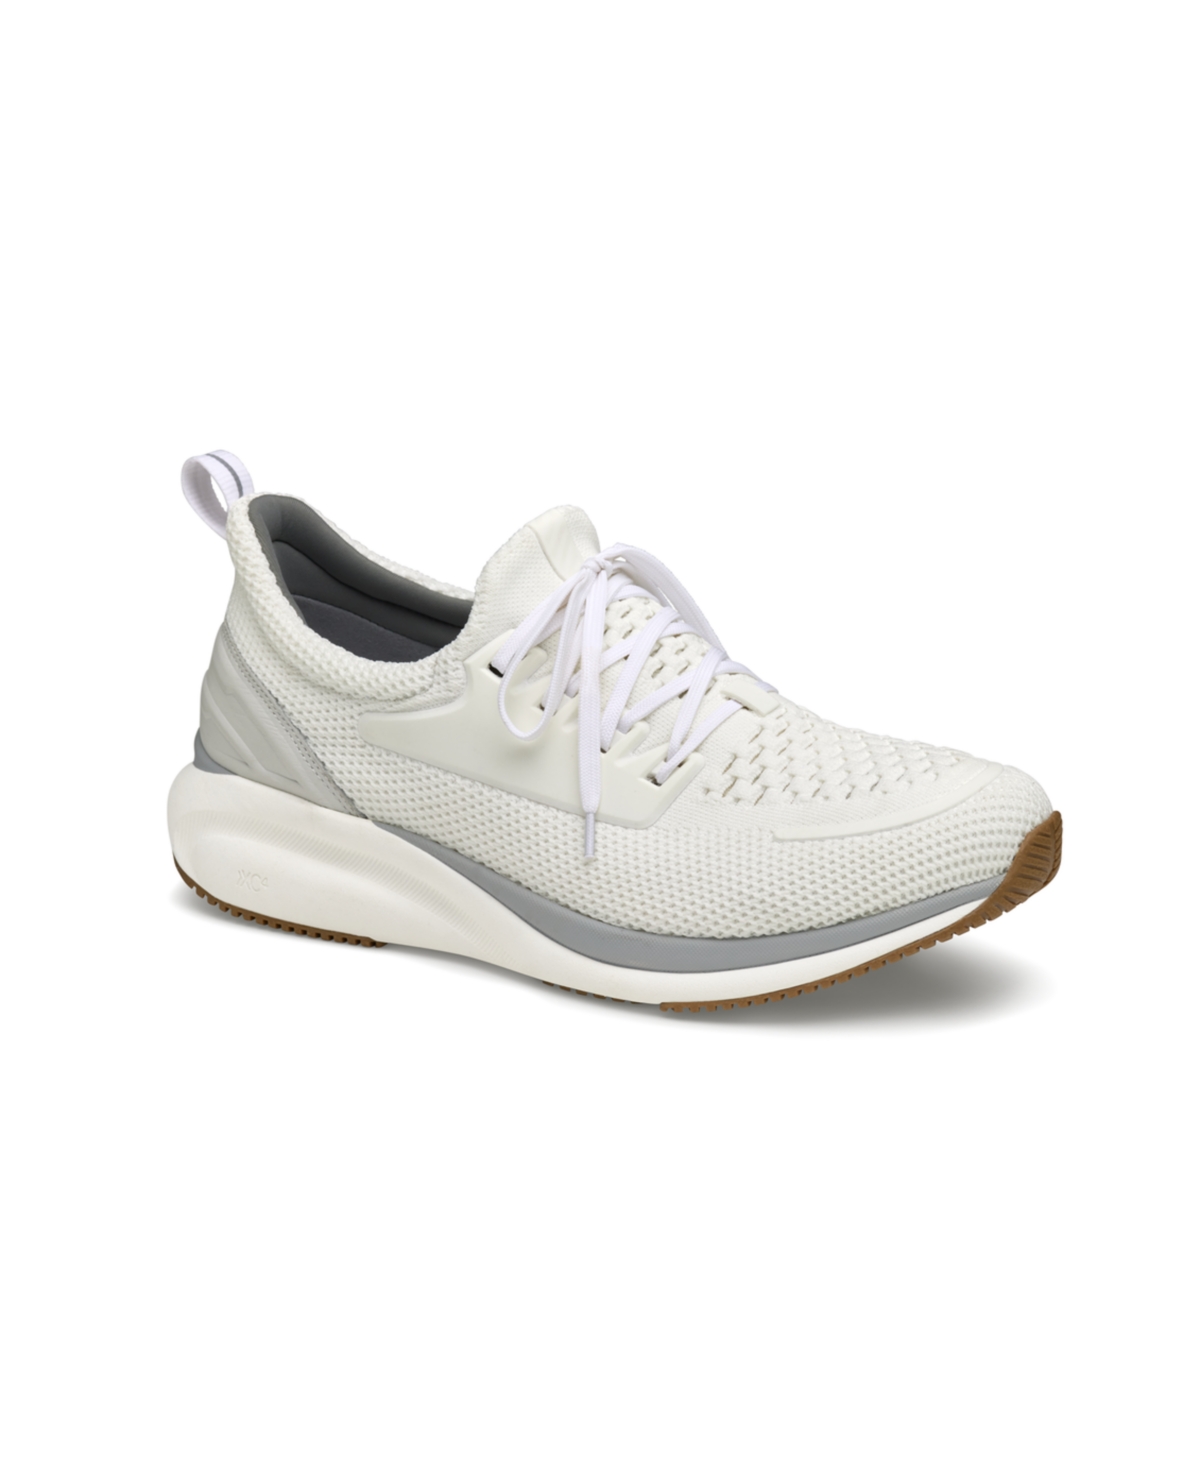 Johnston & Murphy Men's Xc4 Tr1 Sport Hybrid Lace-up Sneakers In White